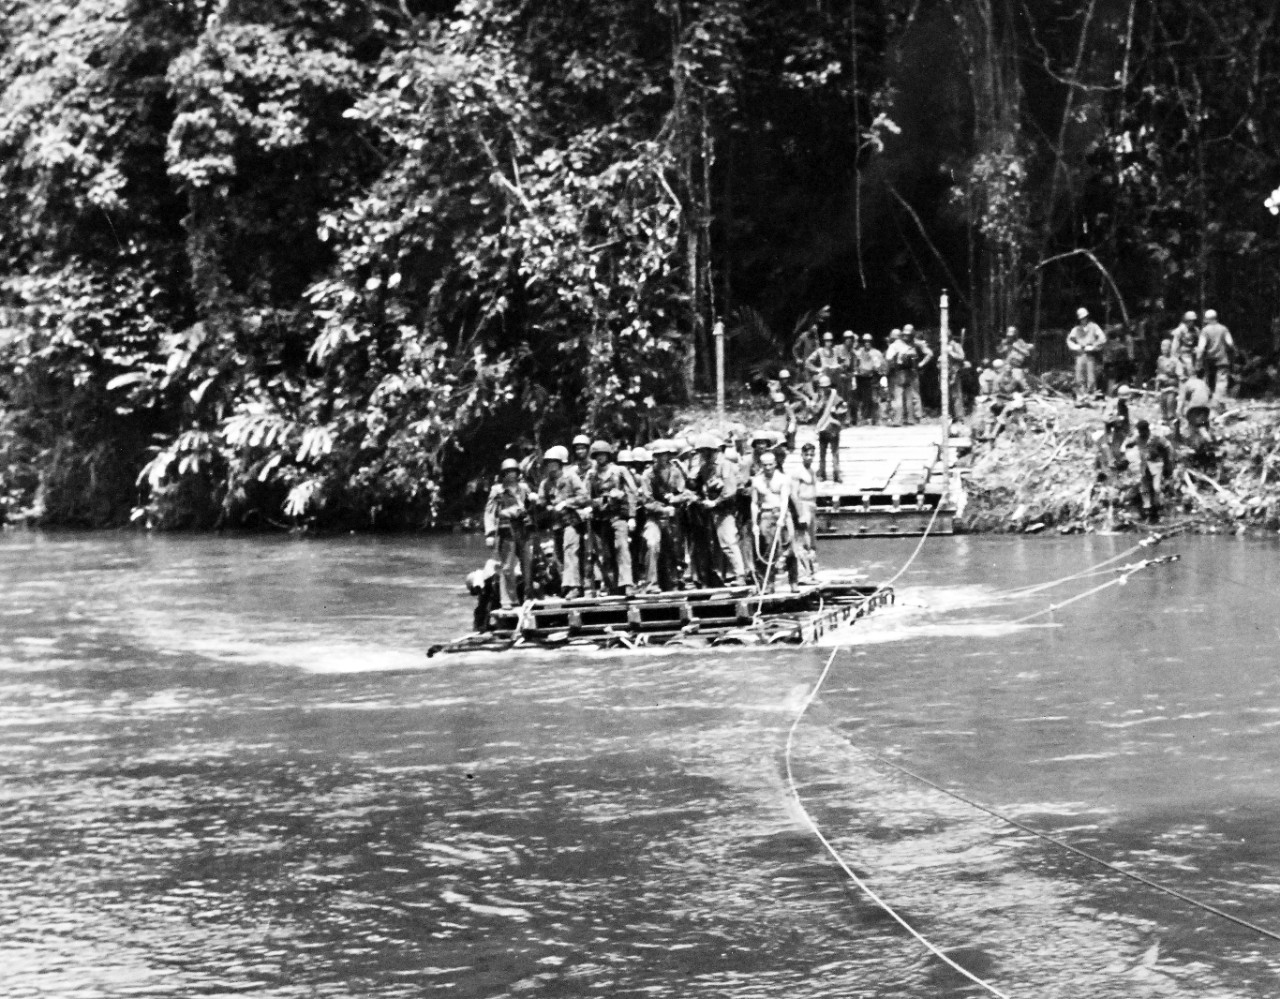 80-G-40267:  Guadalcanal Operation, August 1942-February 1943  U.S. Marine engineers, on Guadalcanal Island during the Solomon Islands Campaign, use constructed rafts, 1942.  U.S. Navy Photograph, now in the collections of the National Archives (2015/10/20).